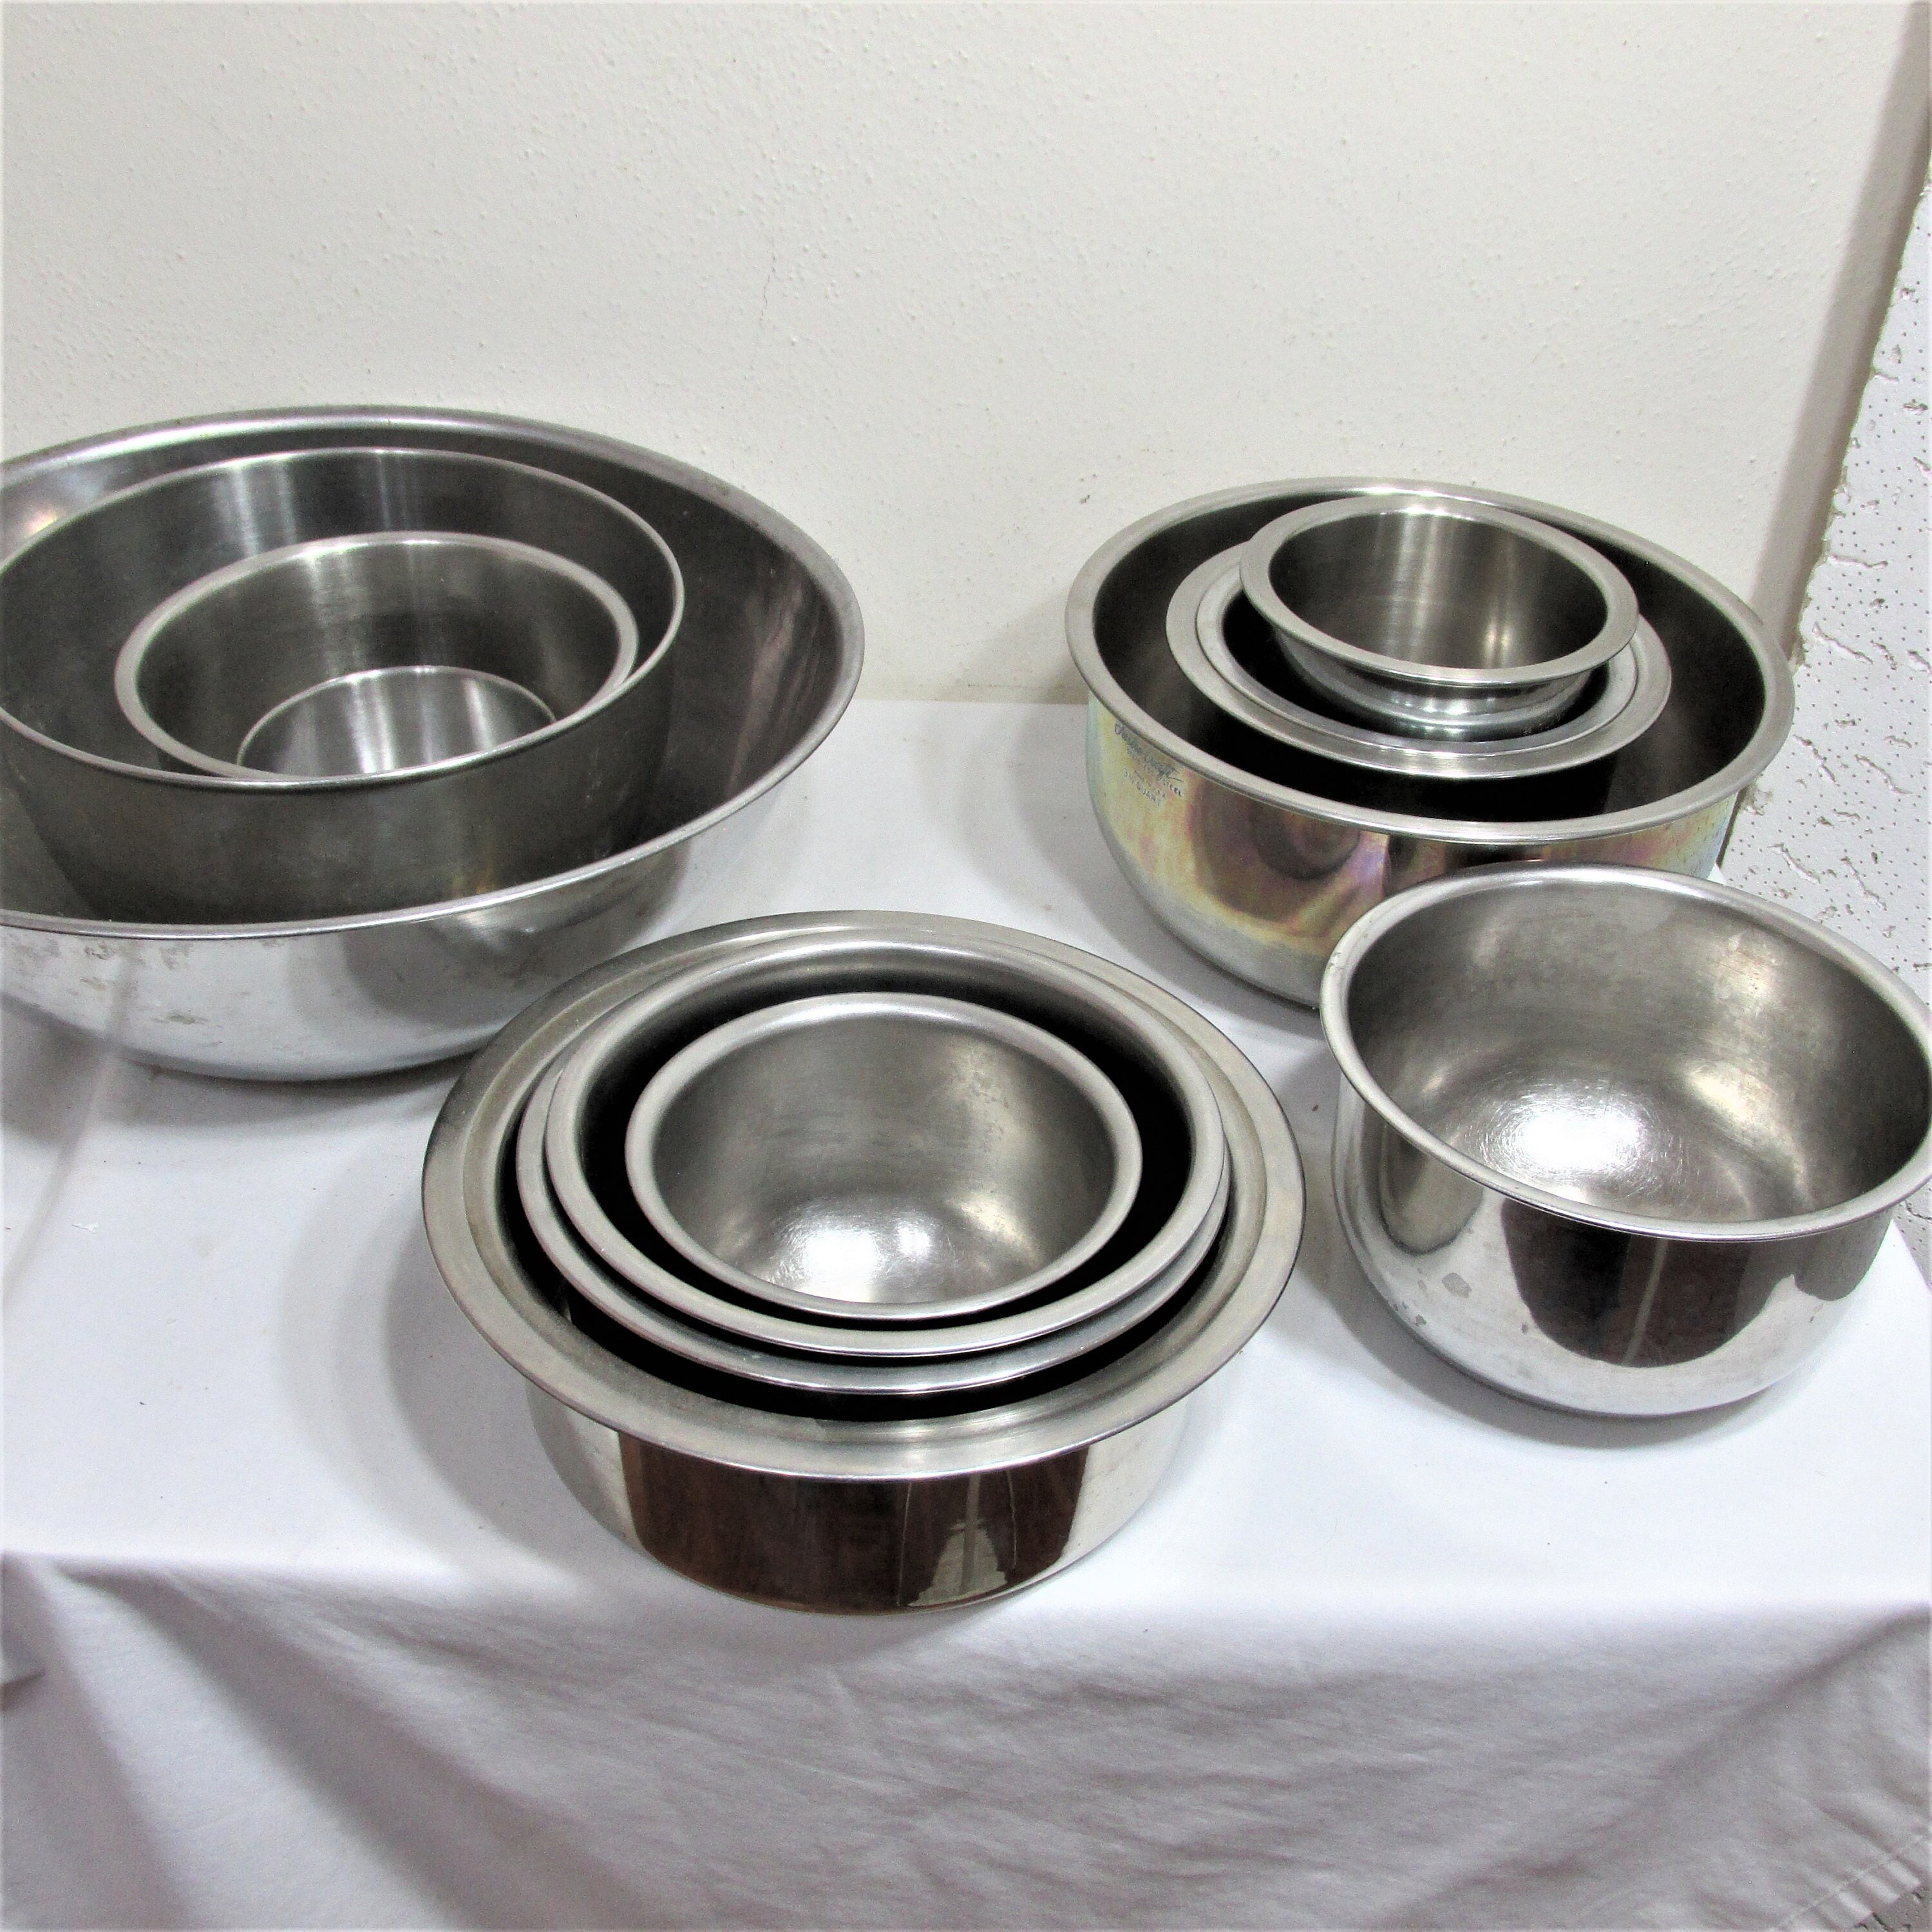 Choice 1.2 Qt. (6 cups) Stainless Steel Batter Bowl